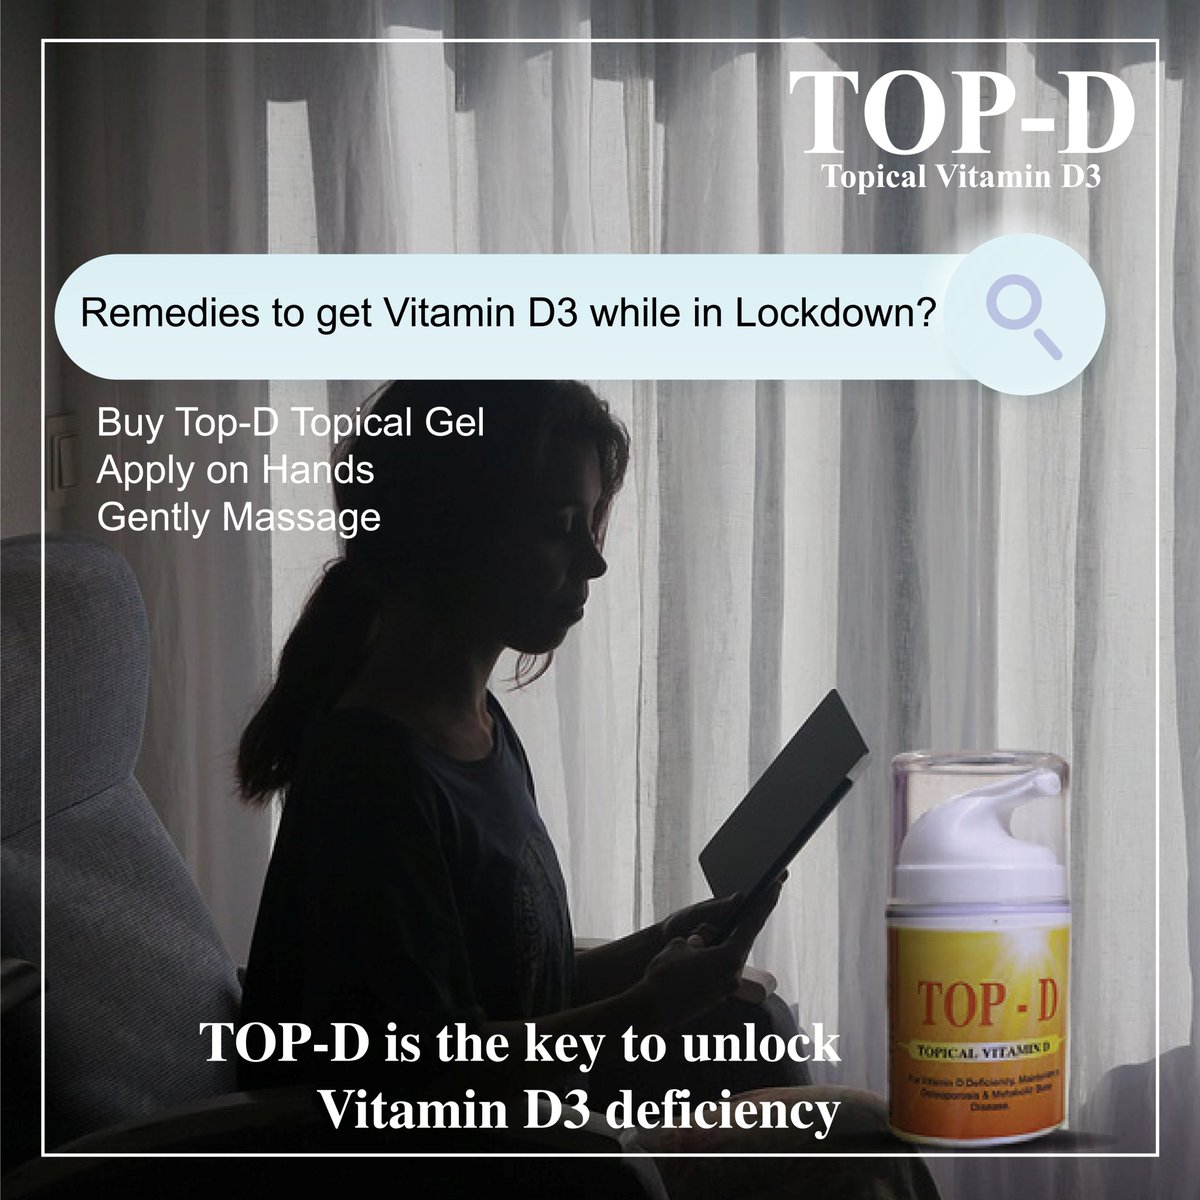 While everyone is getting used to a new lifestyle of working from home, you can still give your body the advantage of perfect Vitamin D3 balance with #TOP-D #TopicalGel. It gives you Vitamin D3 directly through your skin.Use #TOP-D today amzn.to/36NnS3z #lockdownvitamdind